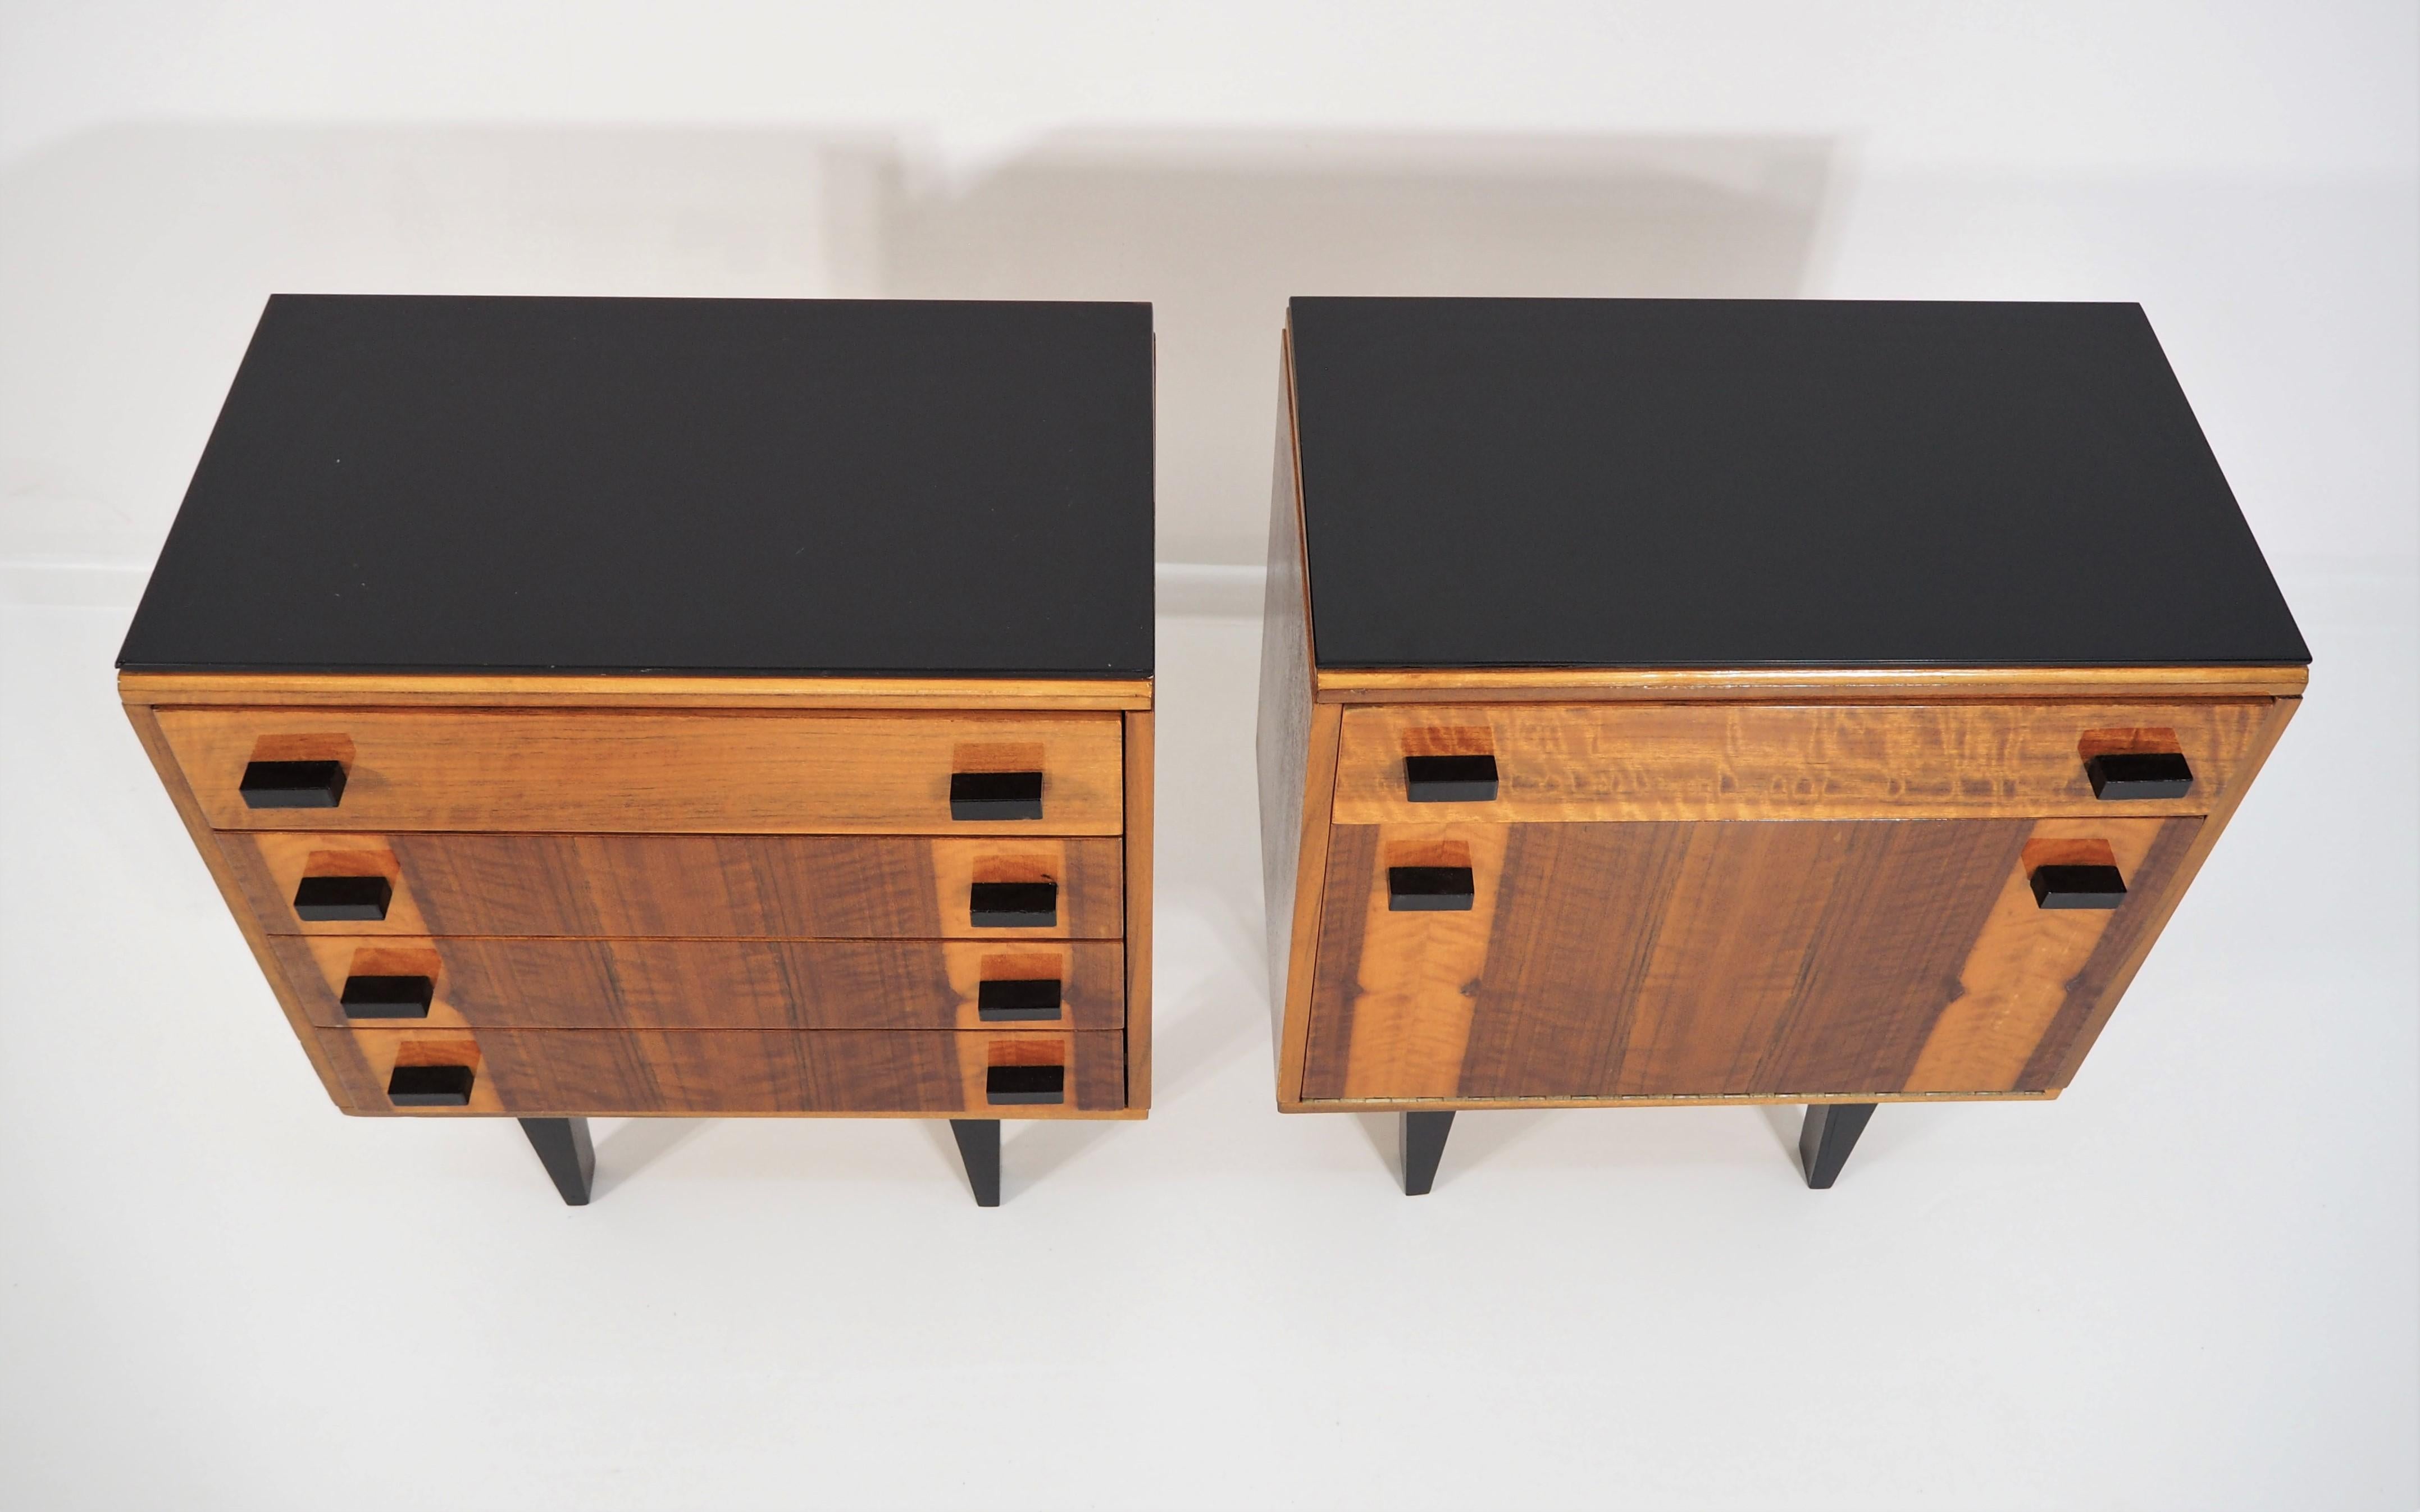 Vintage nightstands 1970s, set of 2. Walnut. Original condition. Scandinavian and Minimalist style is also perfect for modern interiors. Original condition with label.